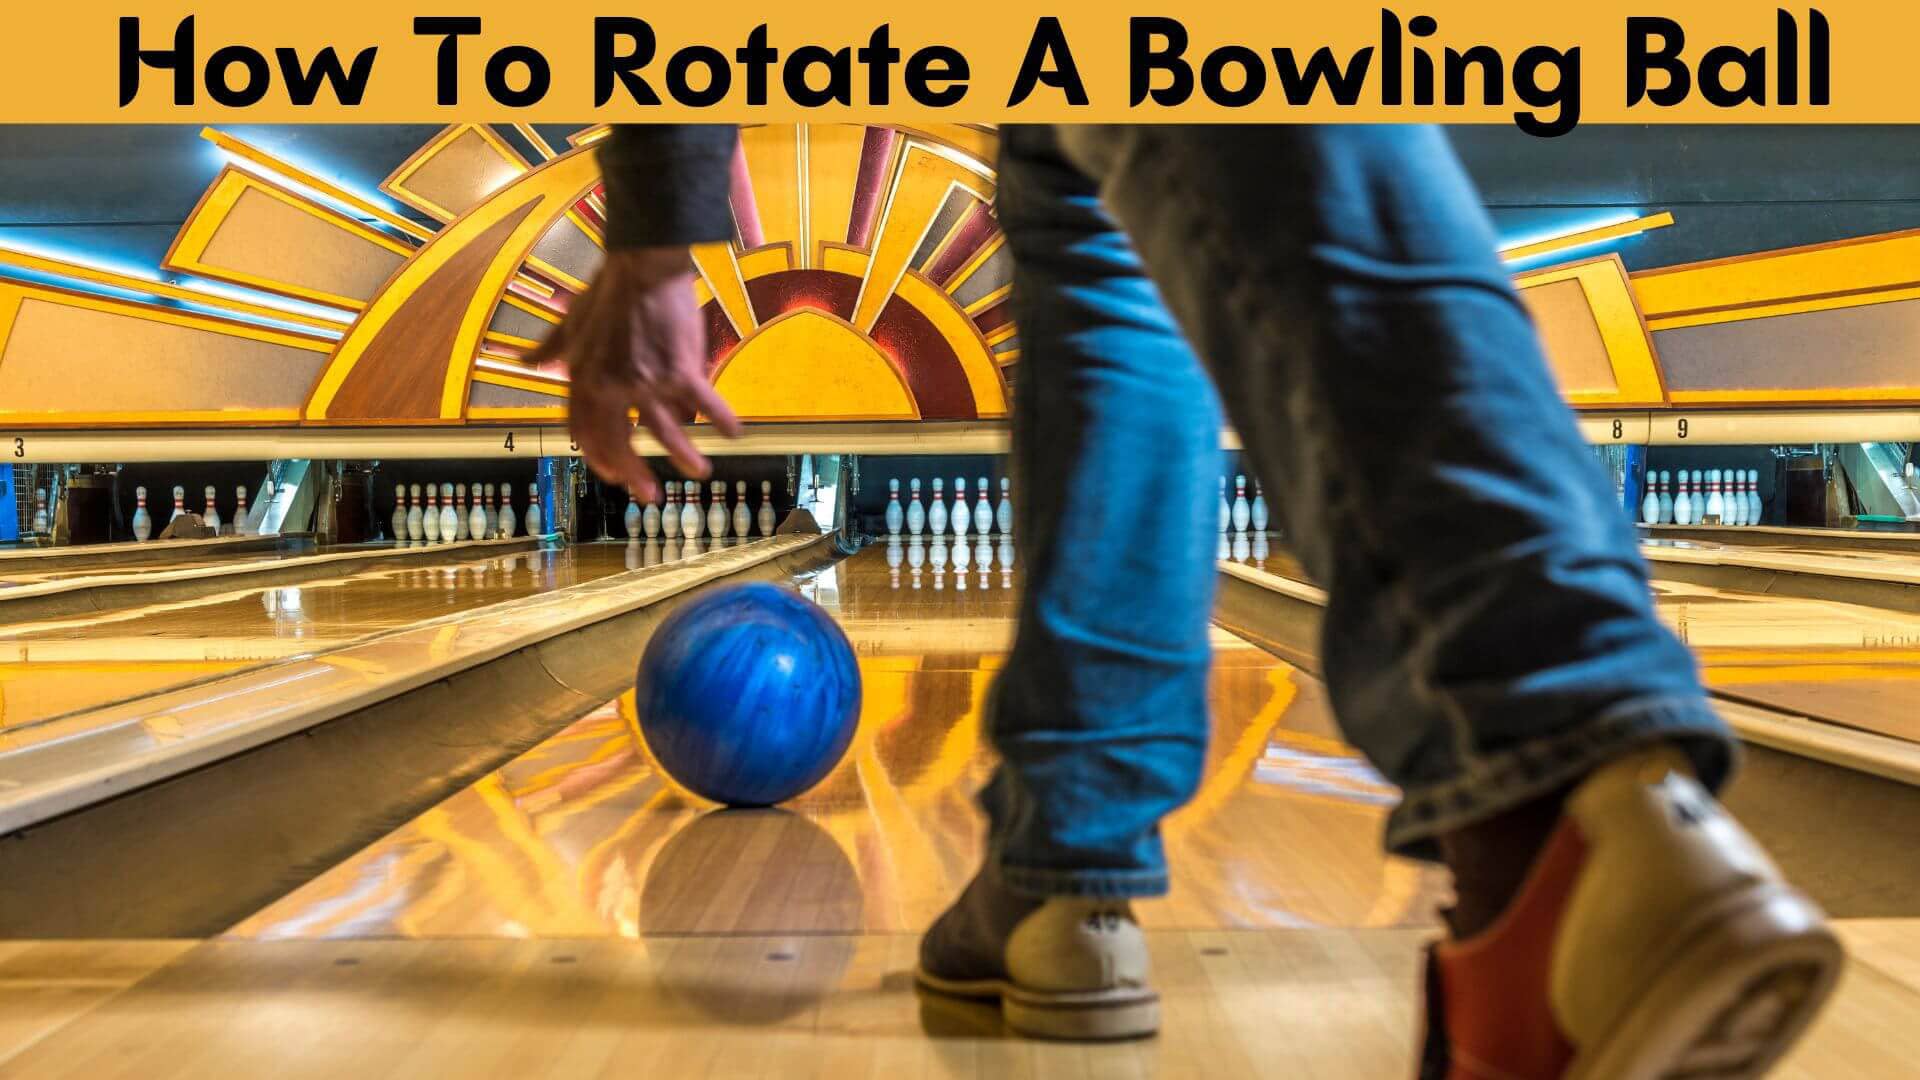 How to Rotate a Bowling Ball?